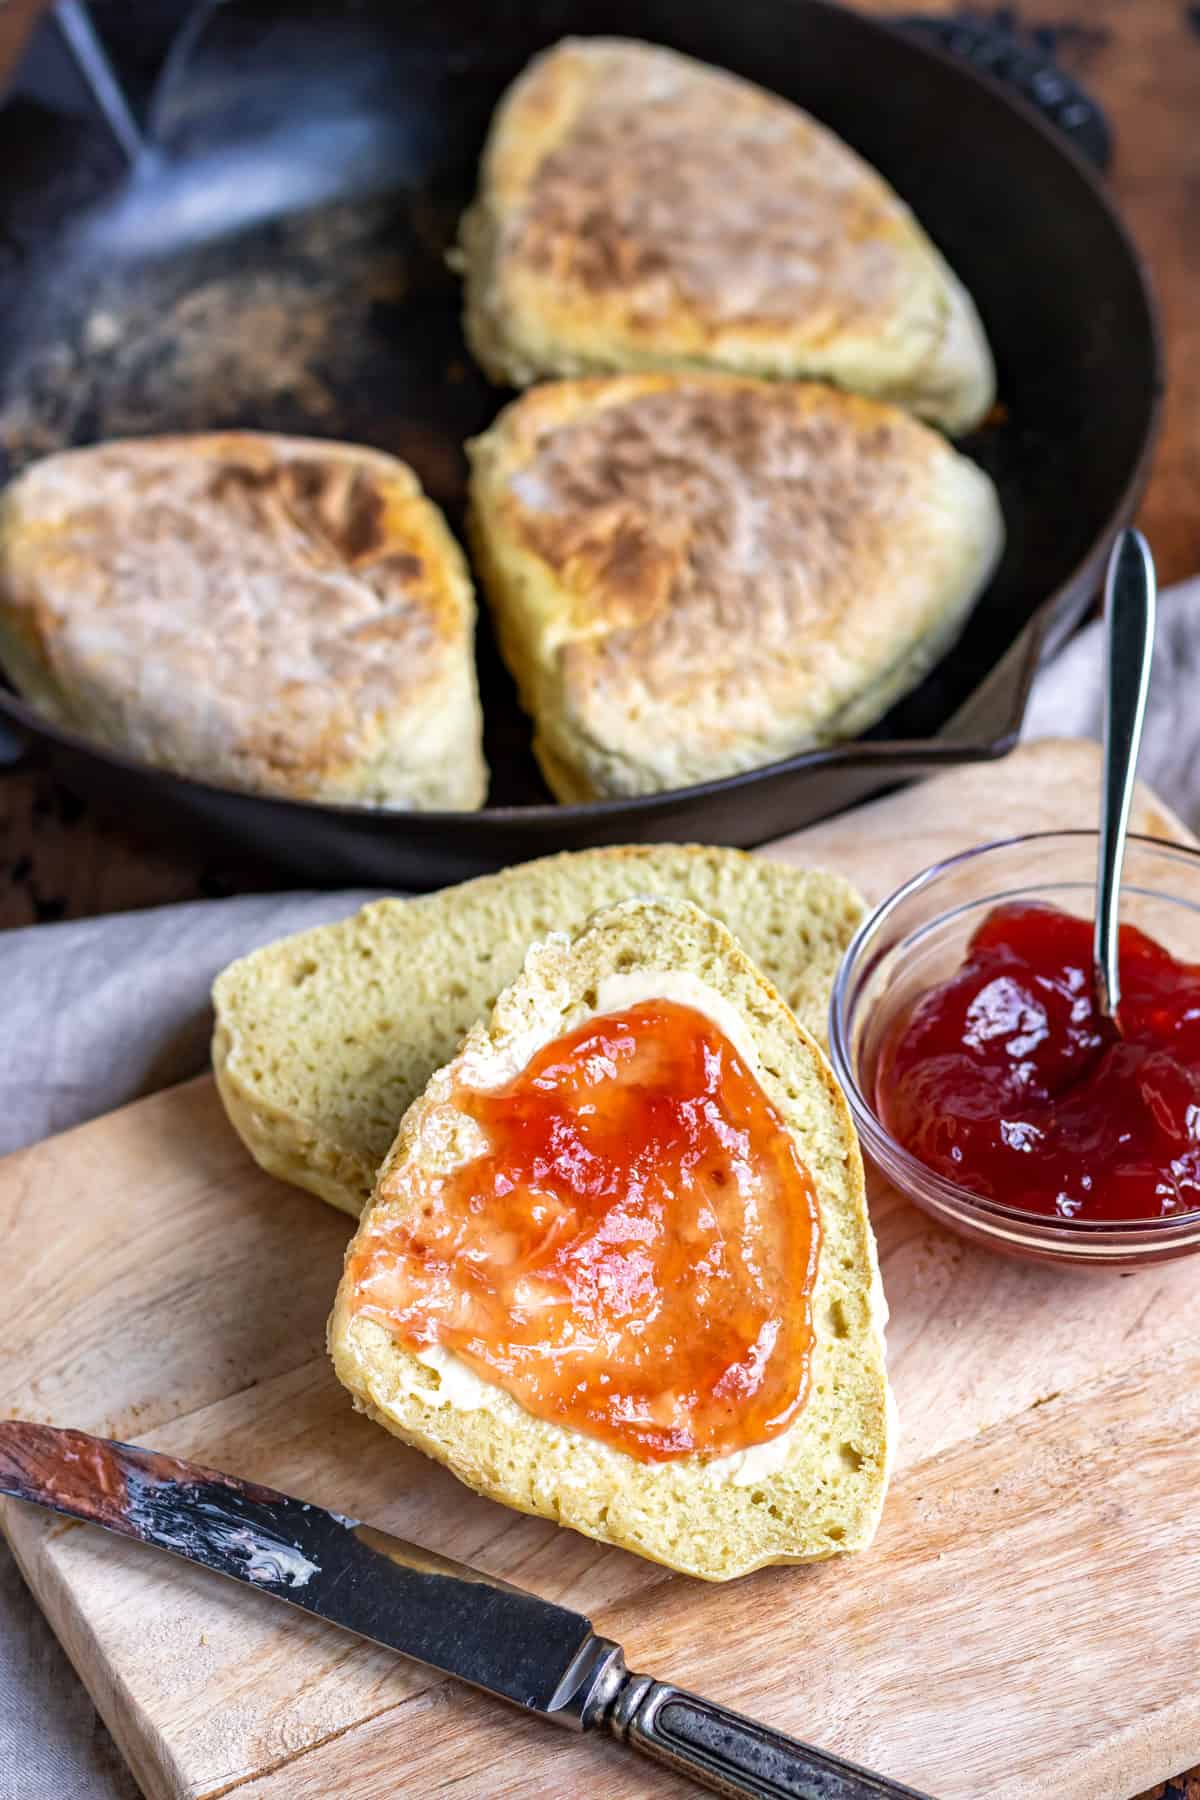 A table with soda farls spread with butter and jam.